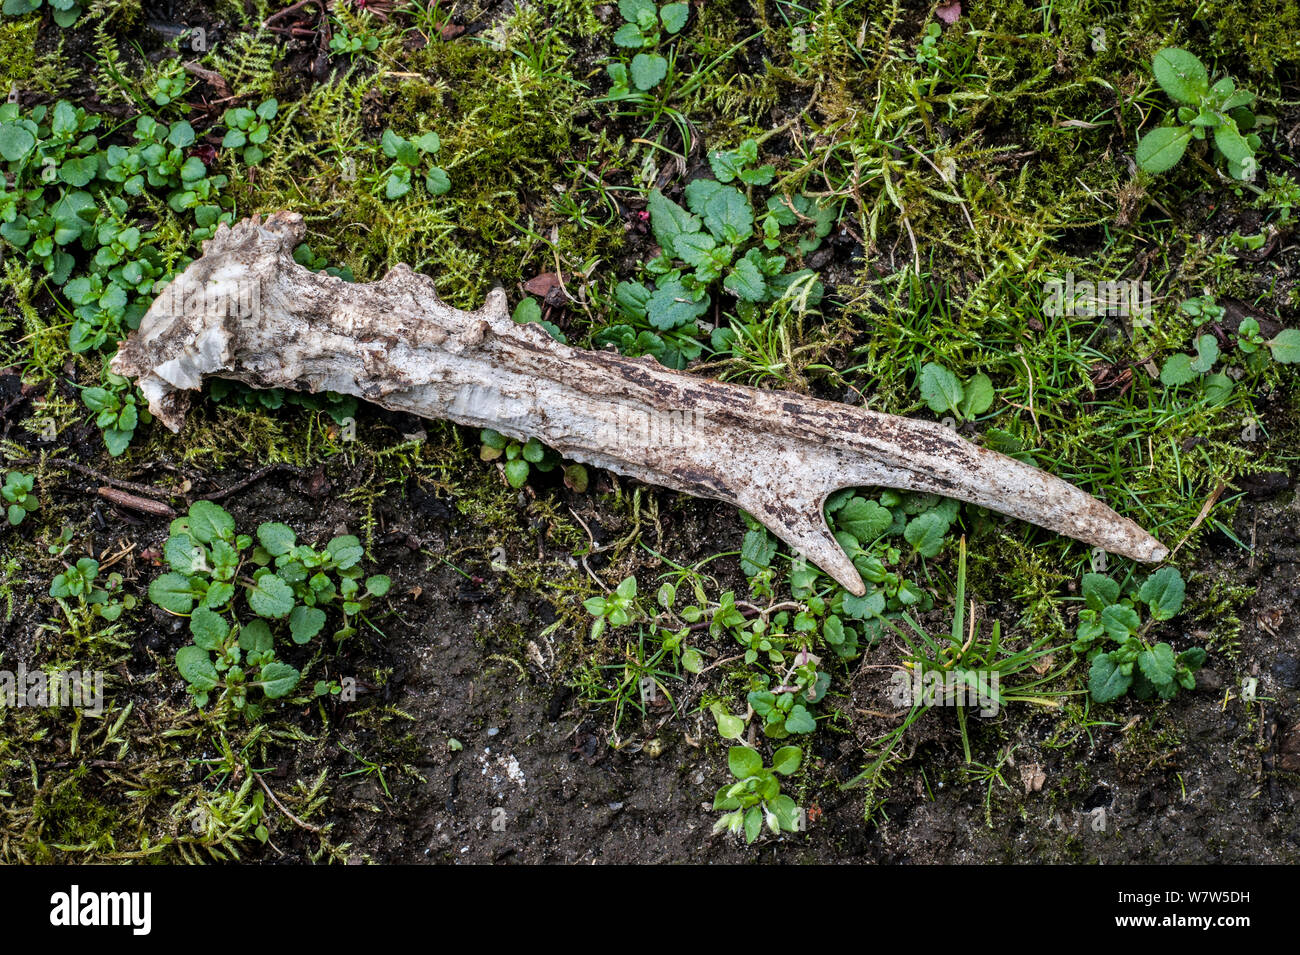 Roe deer (Capreolus capreolus) antler, showing teeth marks where it has been gnawed upon by mice, squirrels and other rodents for Calcium, Magnesium and other minerals, UK Stock Photo